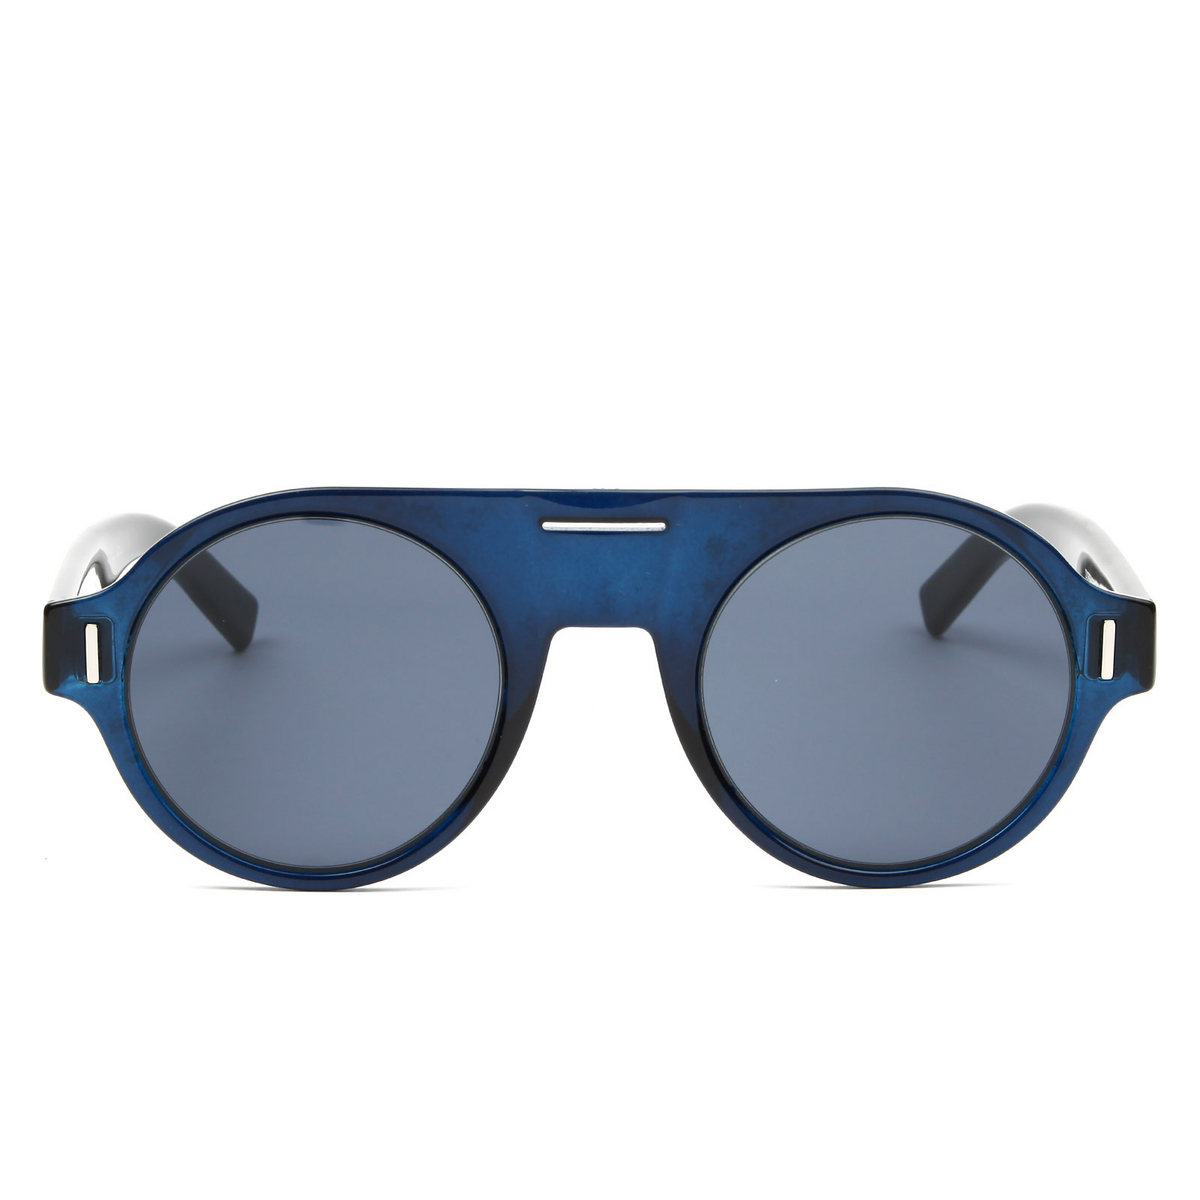 Dior DIORFRACTION2 Sunglasses PJP/A9 Blue - front view